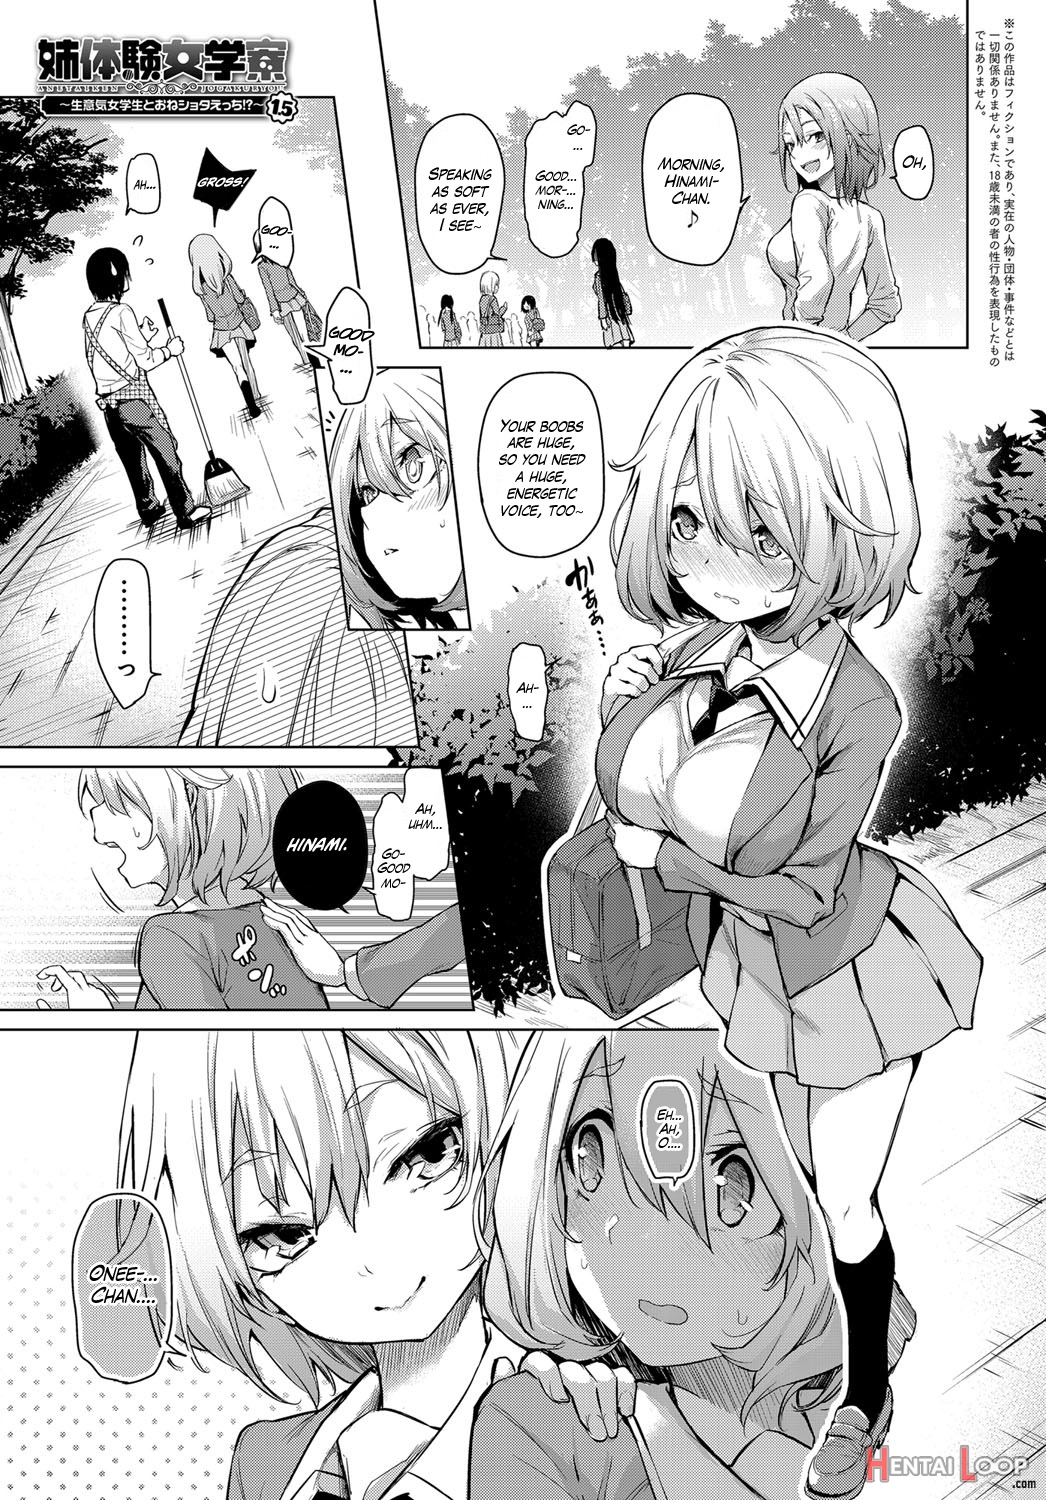 Older Sister Experience - The Girls' Dormitory page 21